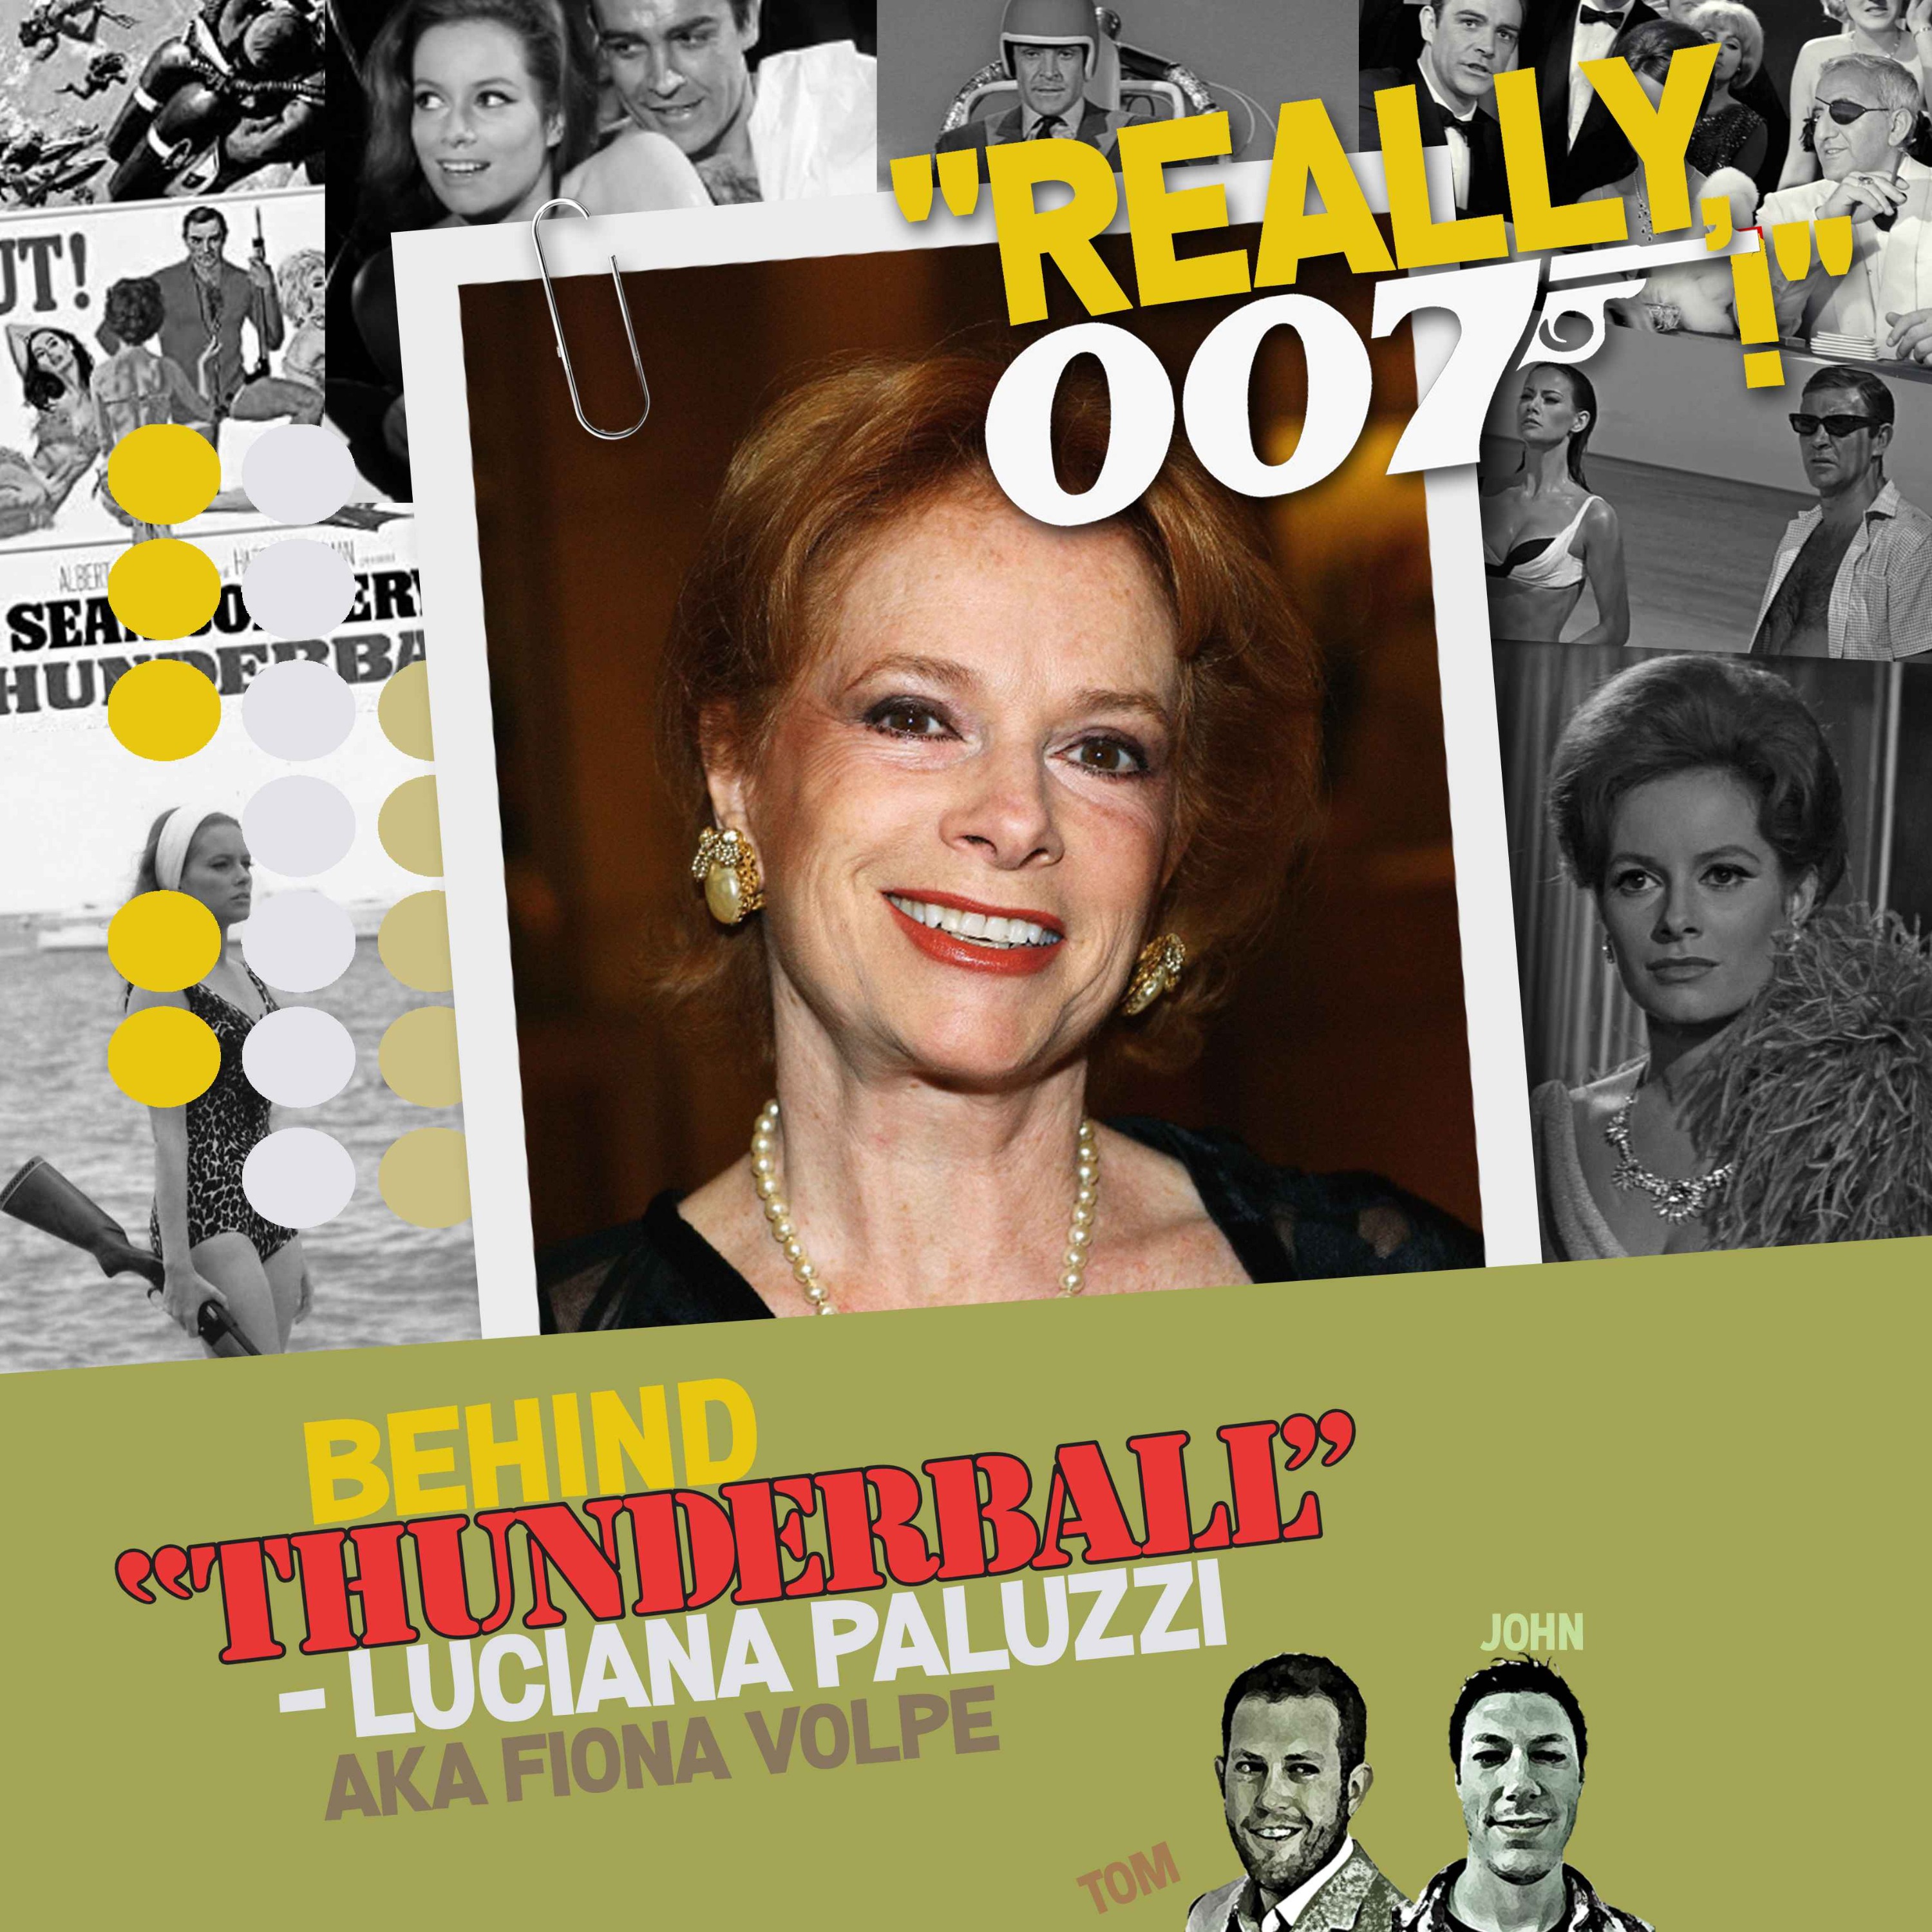 cover art for Behind Thunderball - Luciana Paluzzi aka Fiona Volpe interview